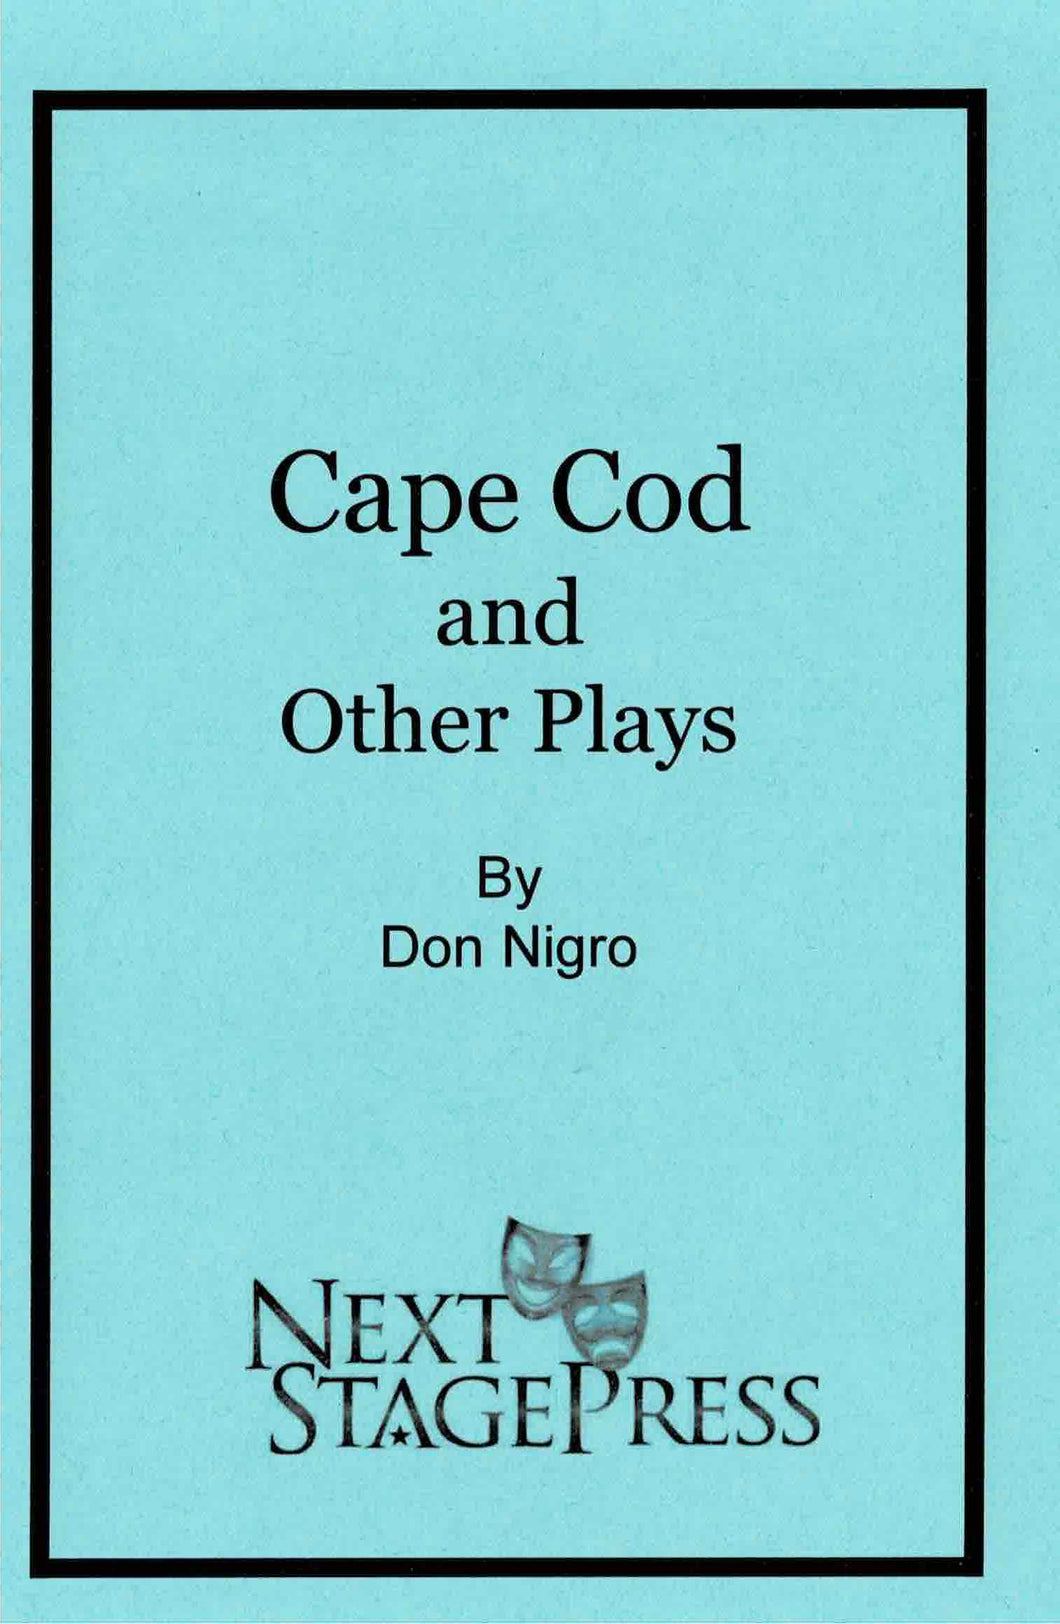 CAPE COD and Other Plays